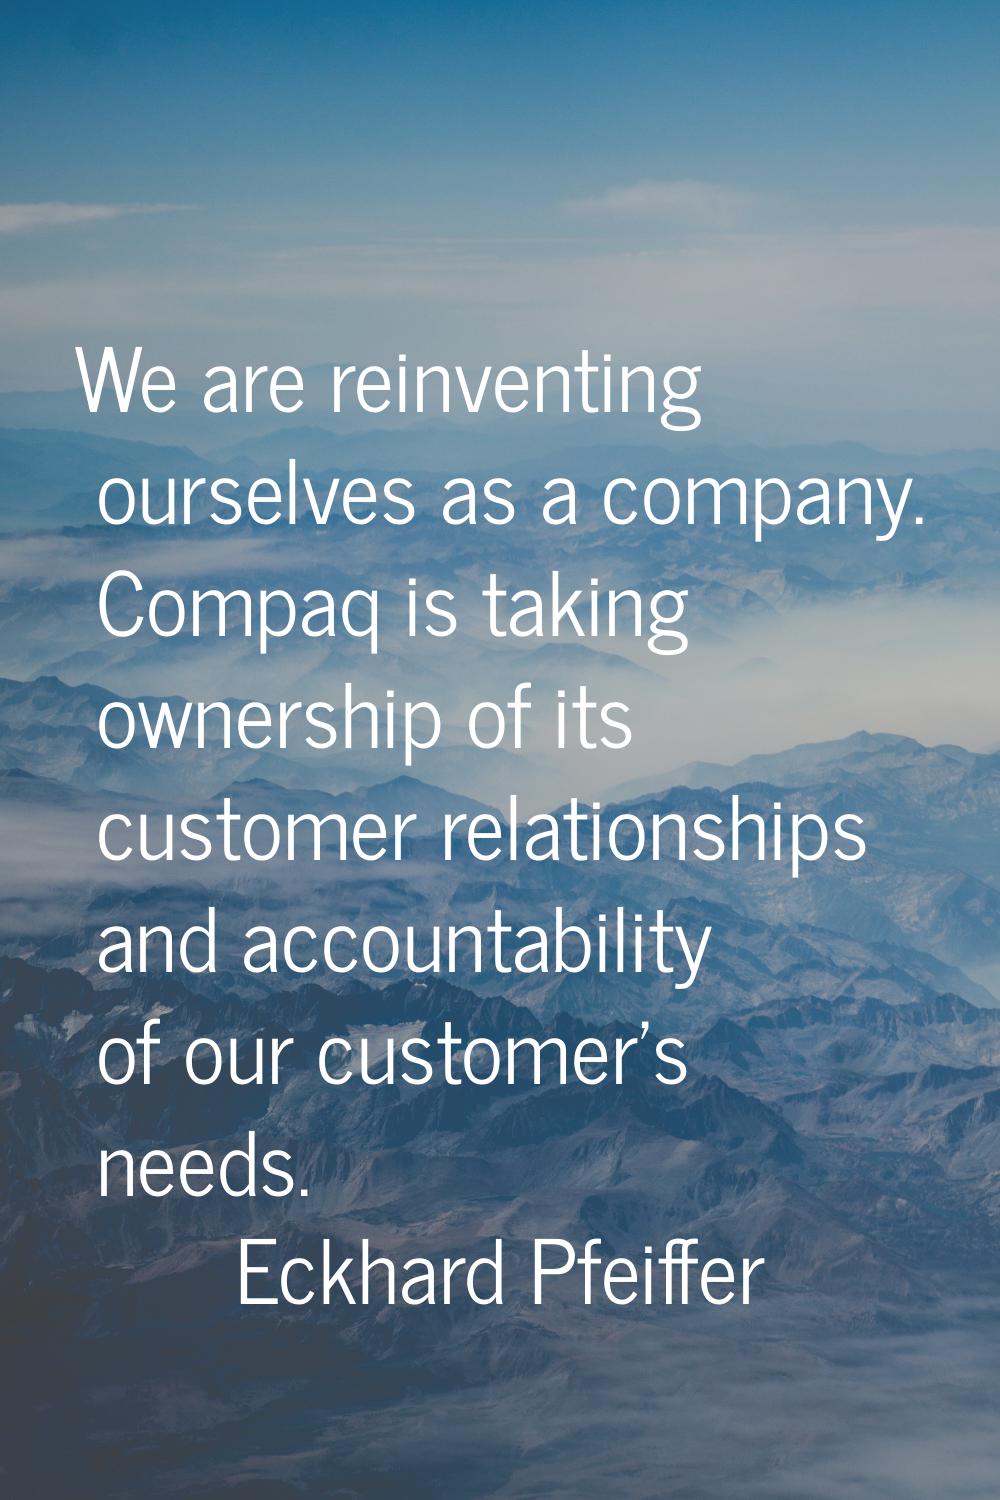 We are reinventing ourselves as a company. Compaq is taking ownership of its customer relationships